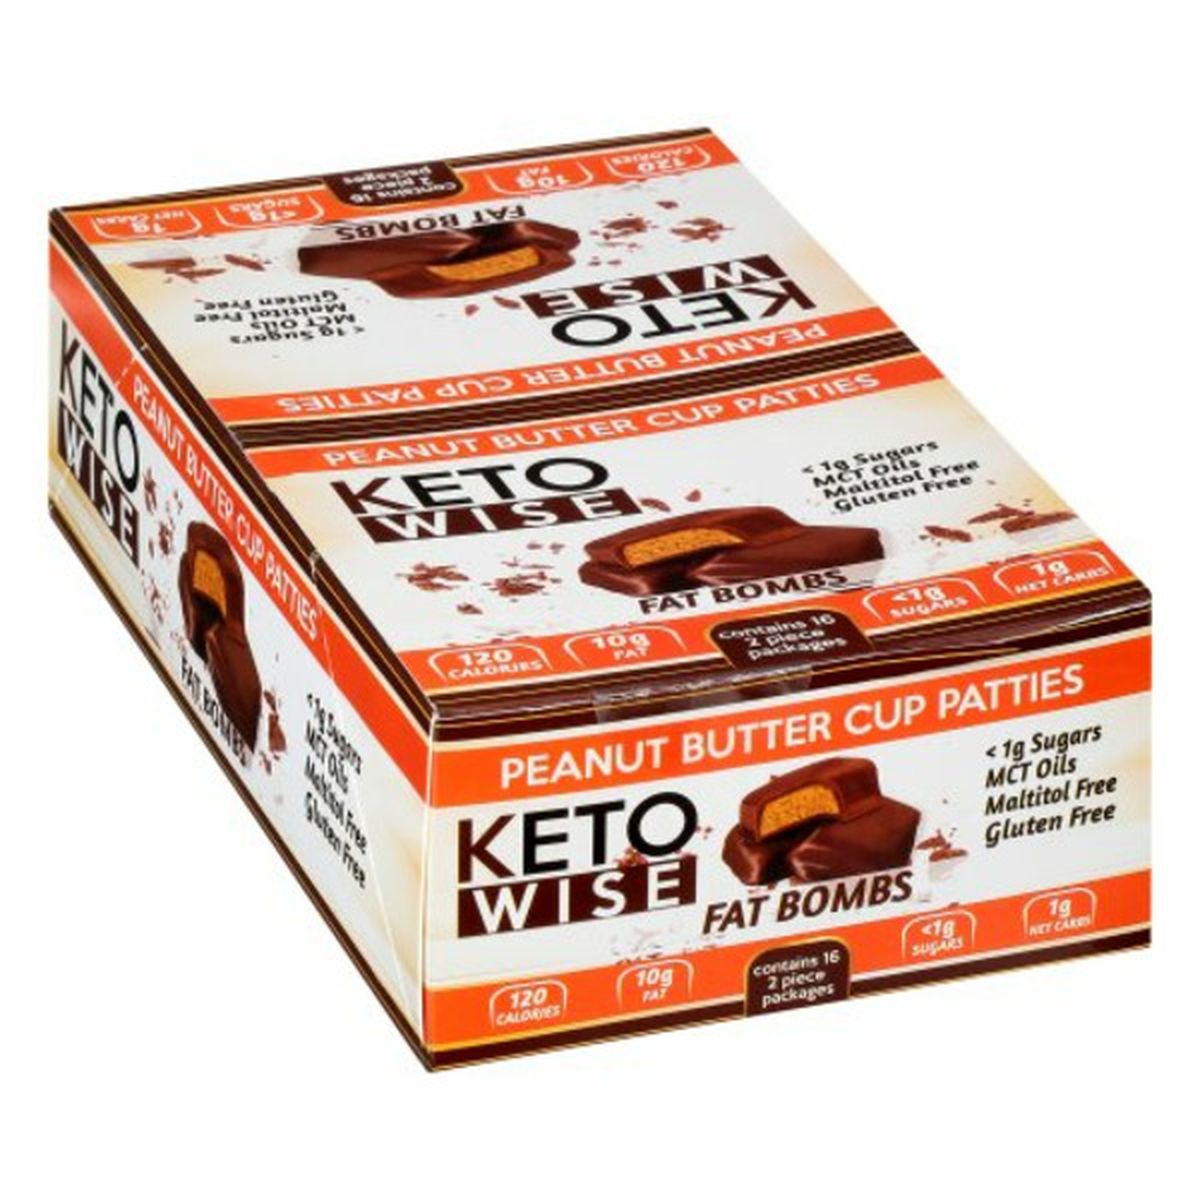 Calories in Keto Wise Fat Bombs, Peanut Butter Cup Patties